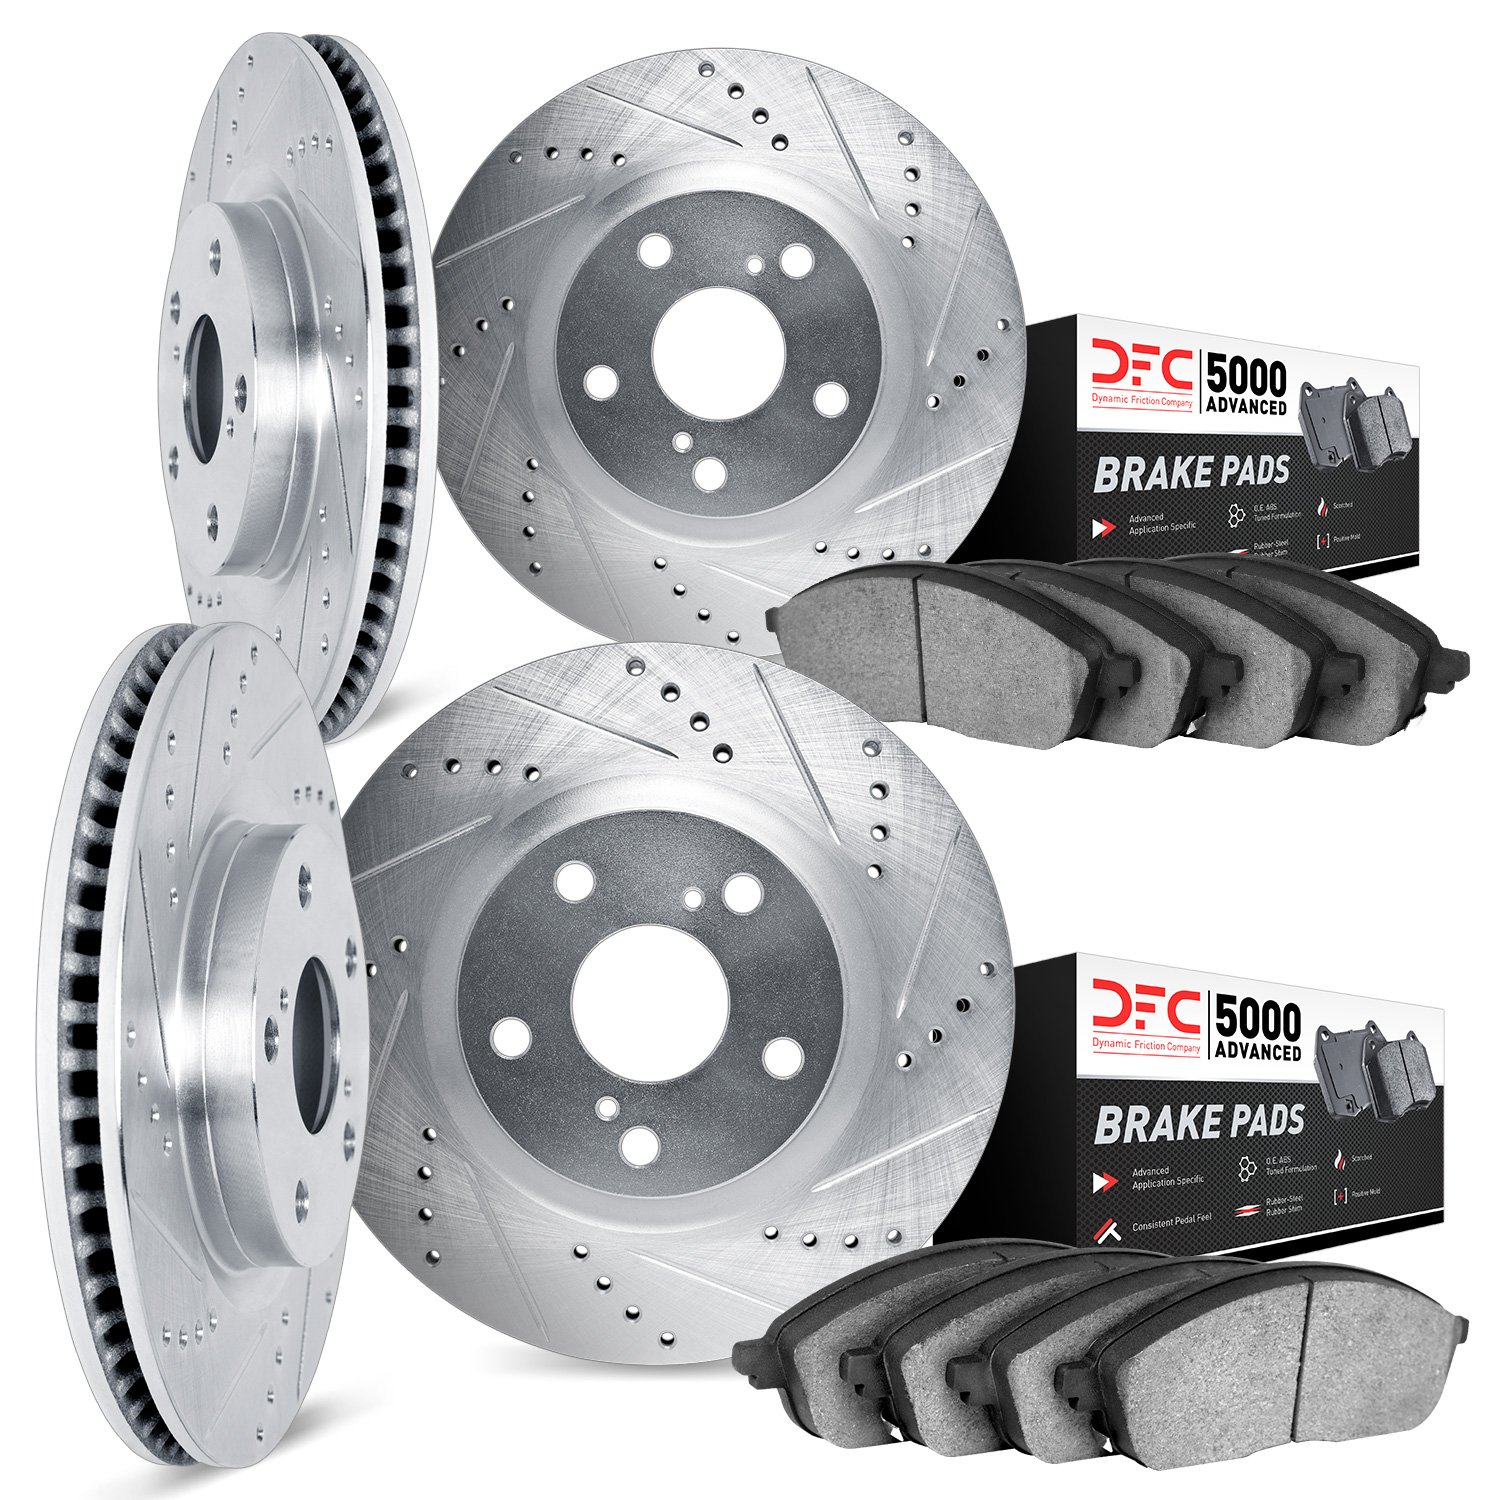 7504-02018 Drilled/Slotted Brake Rotors w/5000 Advanced Brake Pads Kit [Silver], 2008-2008 Porsche, Position: Front and Rear